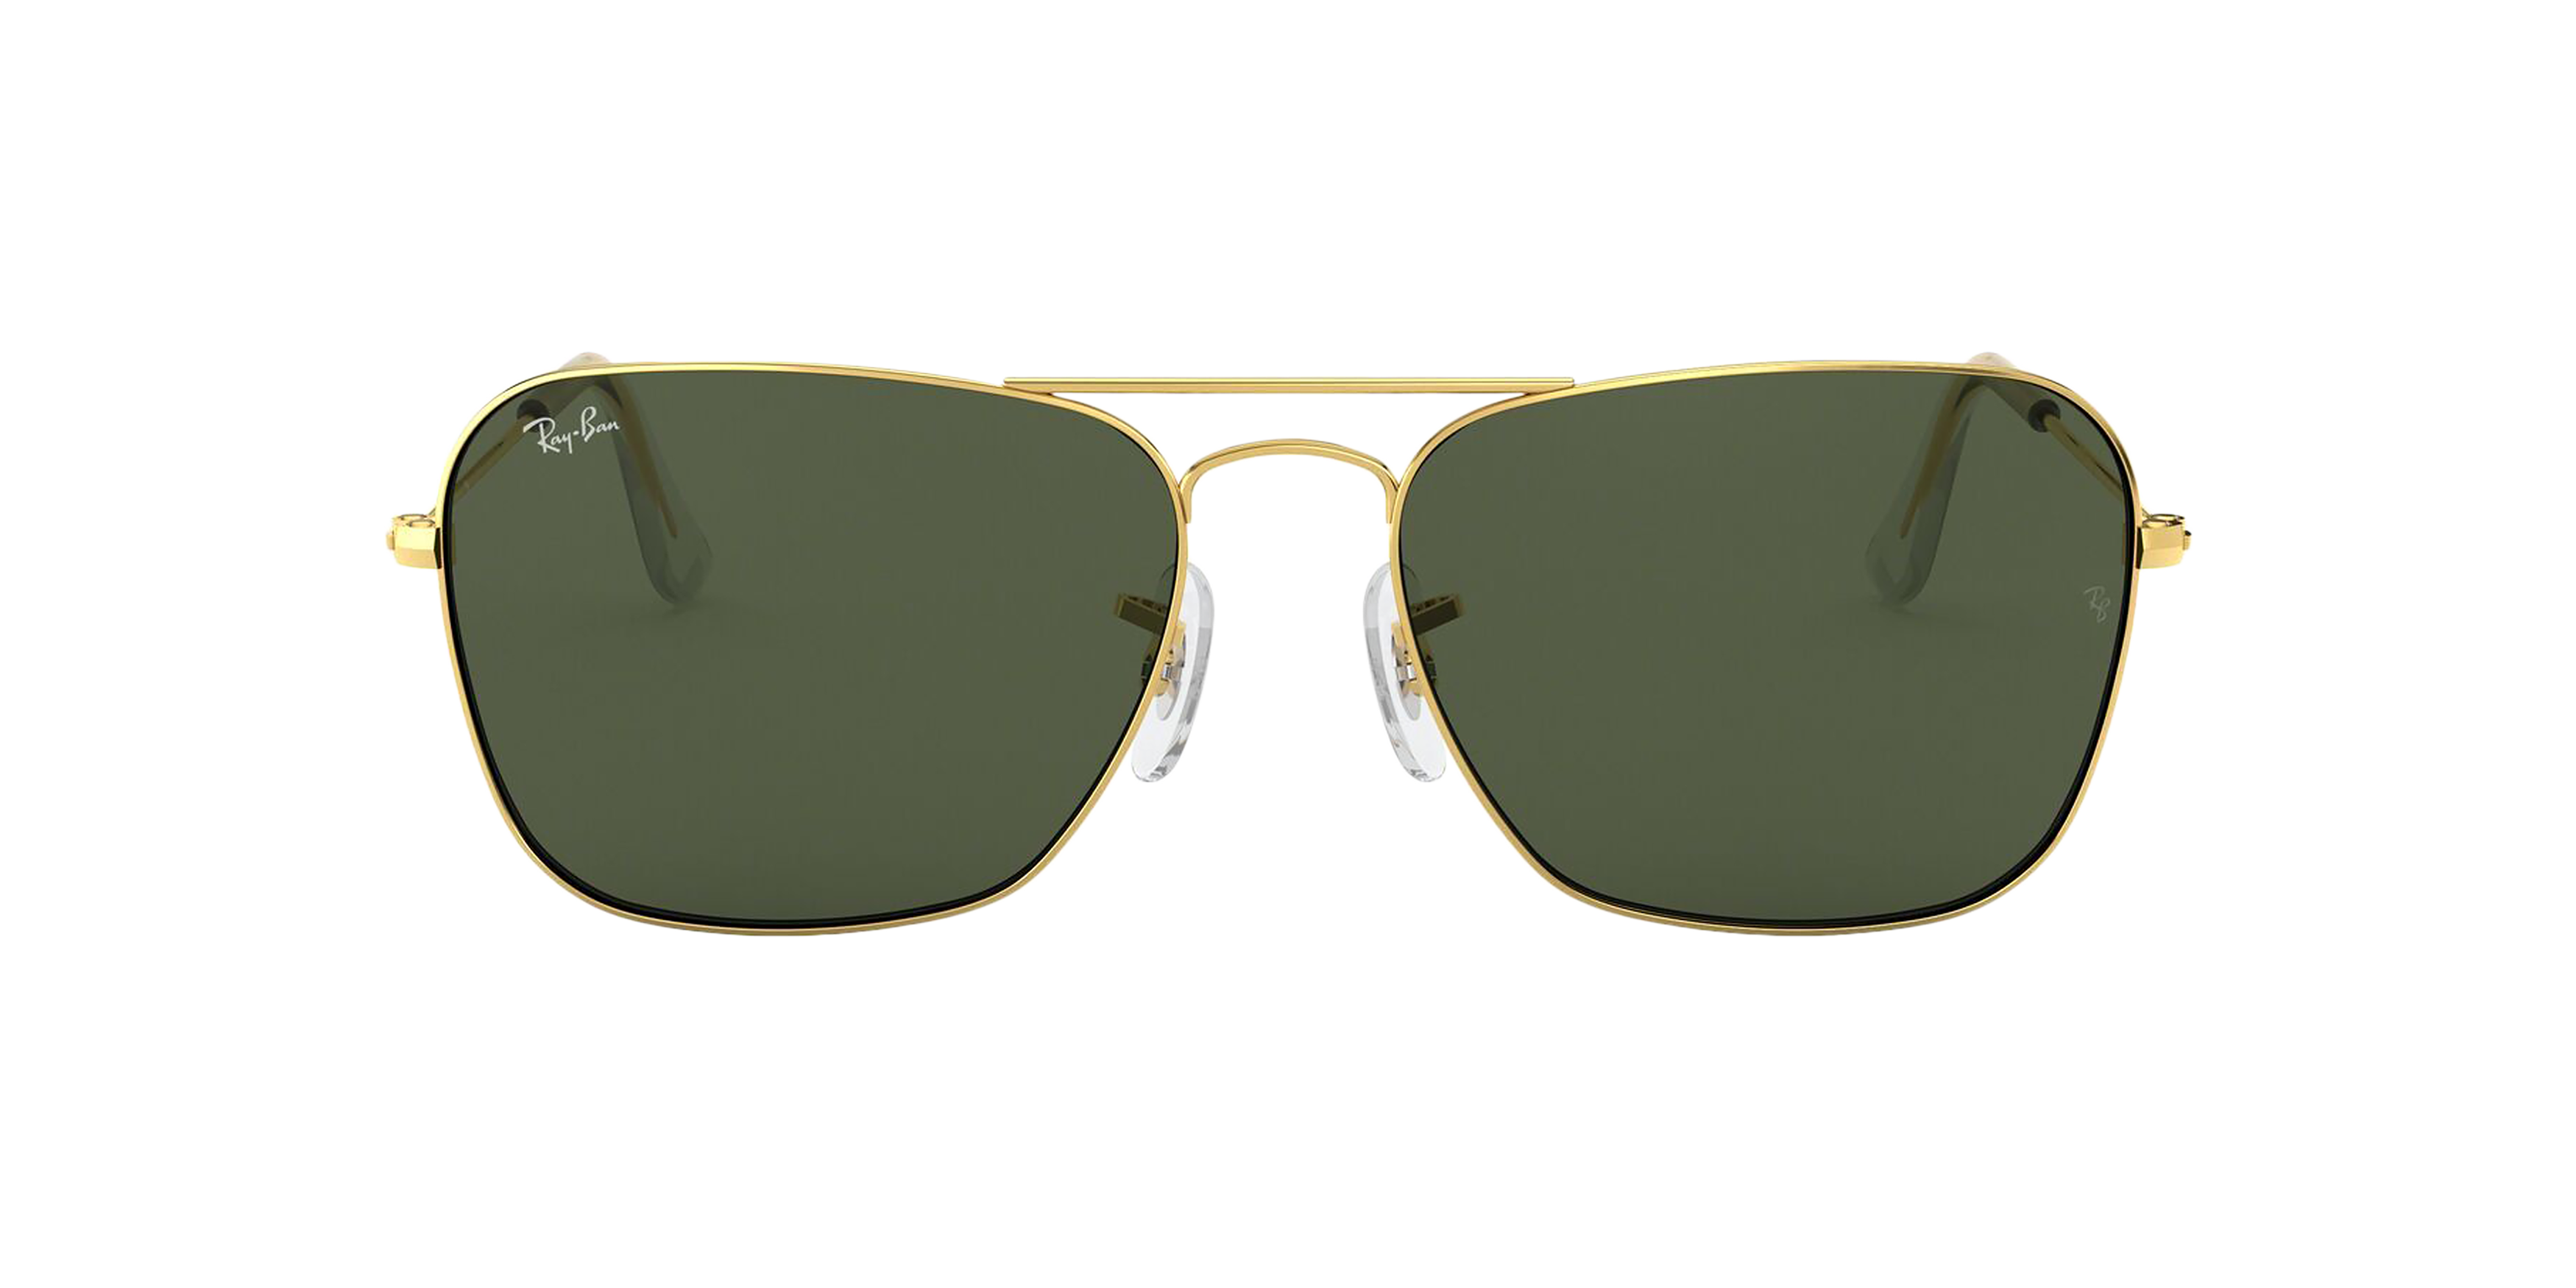 [products.image.front] Ray-Ban Caravan RB3136 001